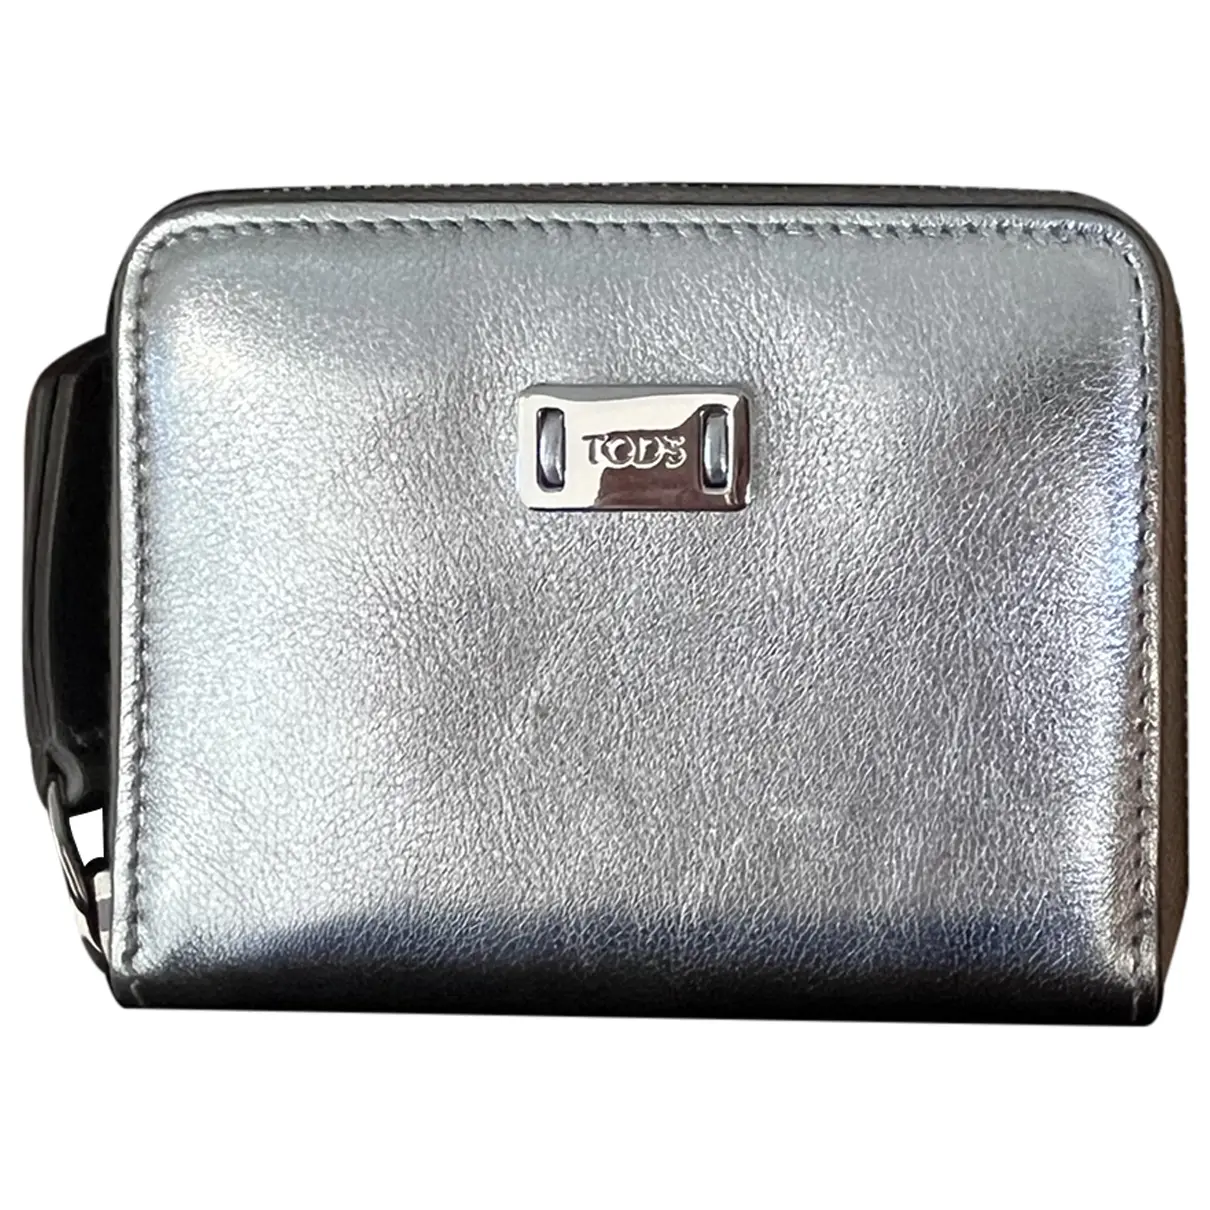 Leather card wallet Tod's